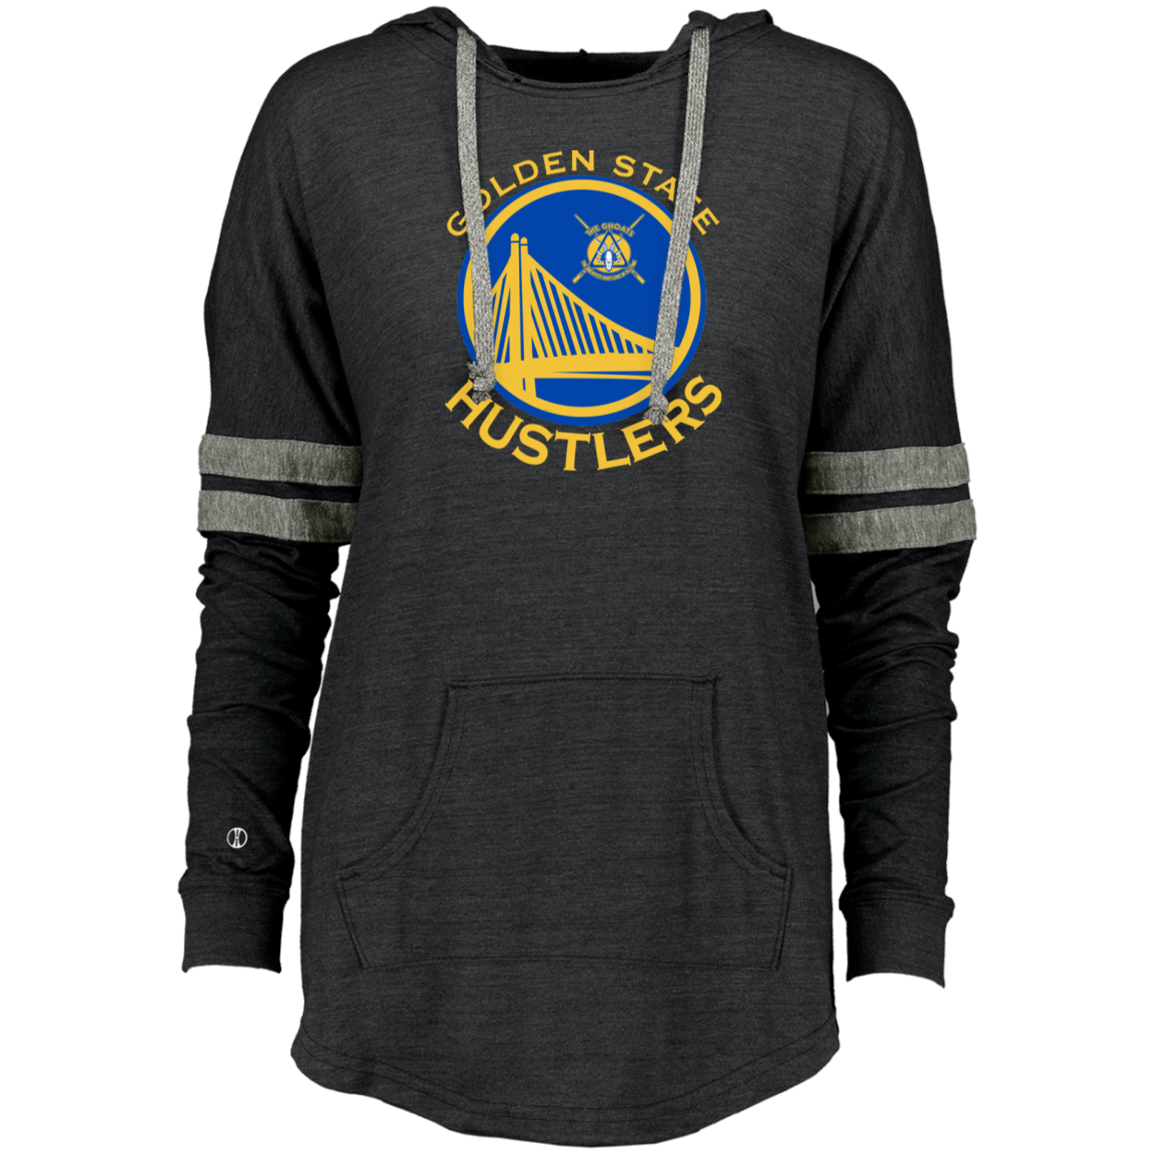 The GHOATS Custom Design. #12 GOLDEN STATE HUSTLERS.	Ladies Hooded Low Key Pullover